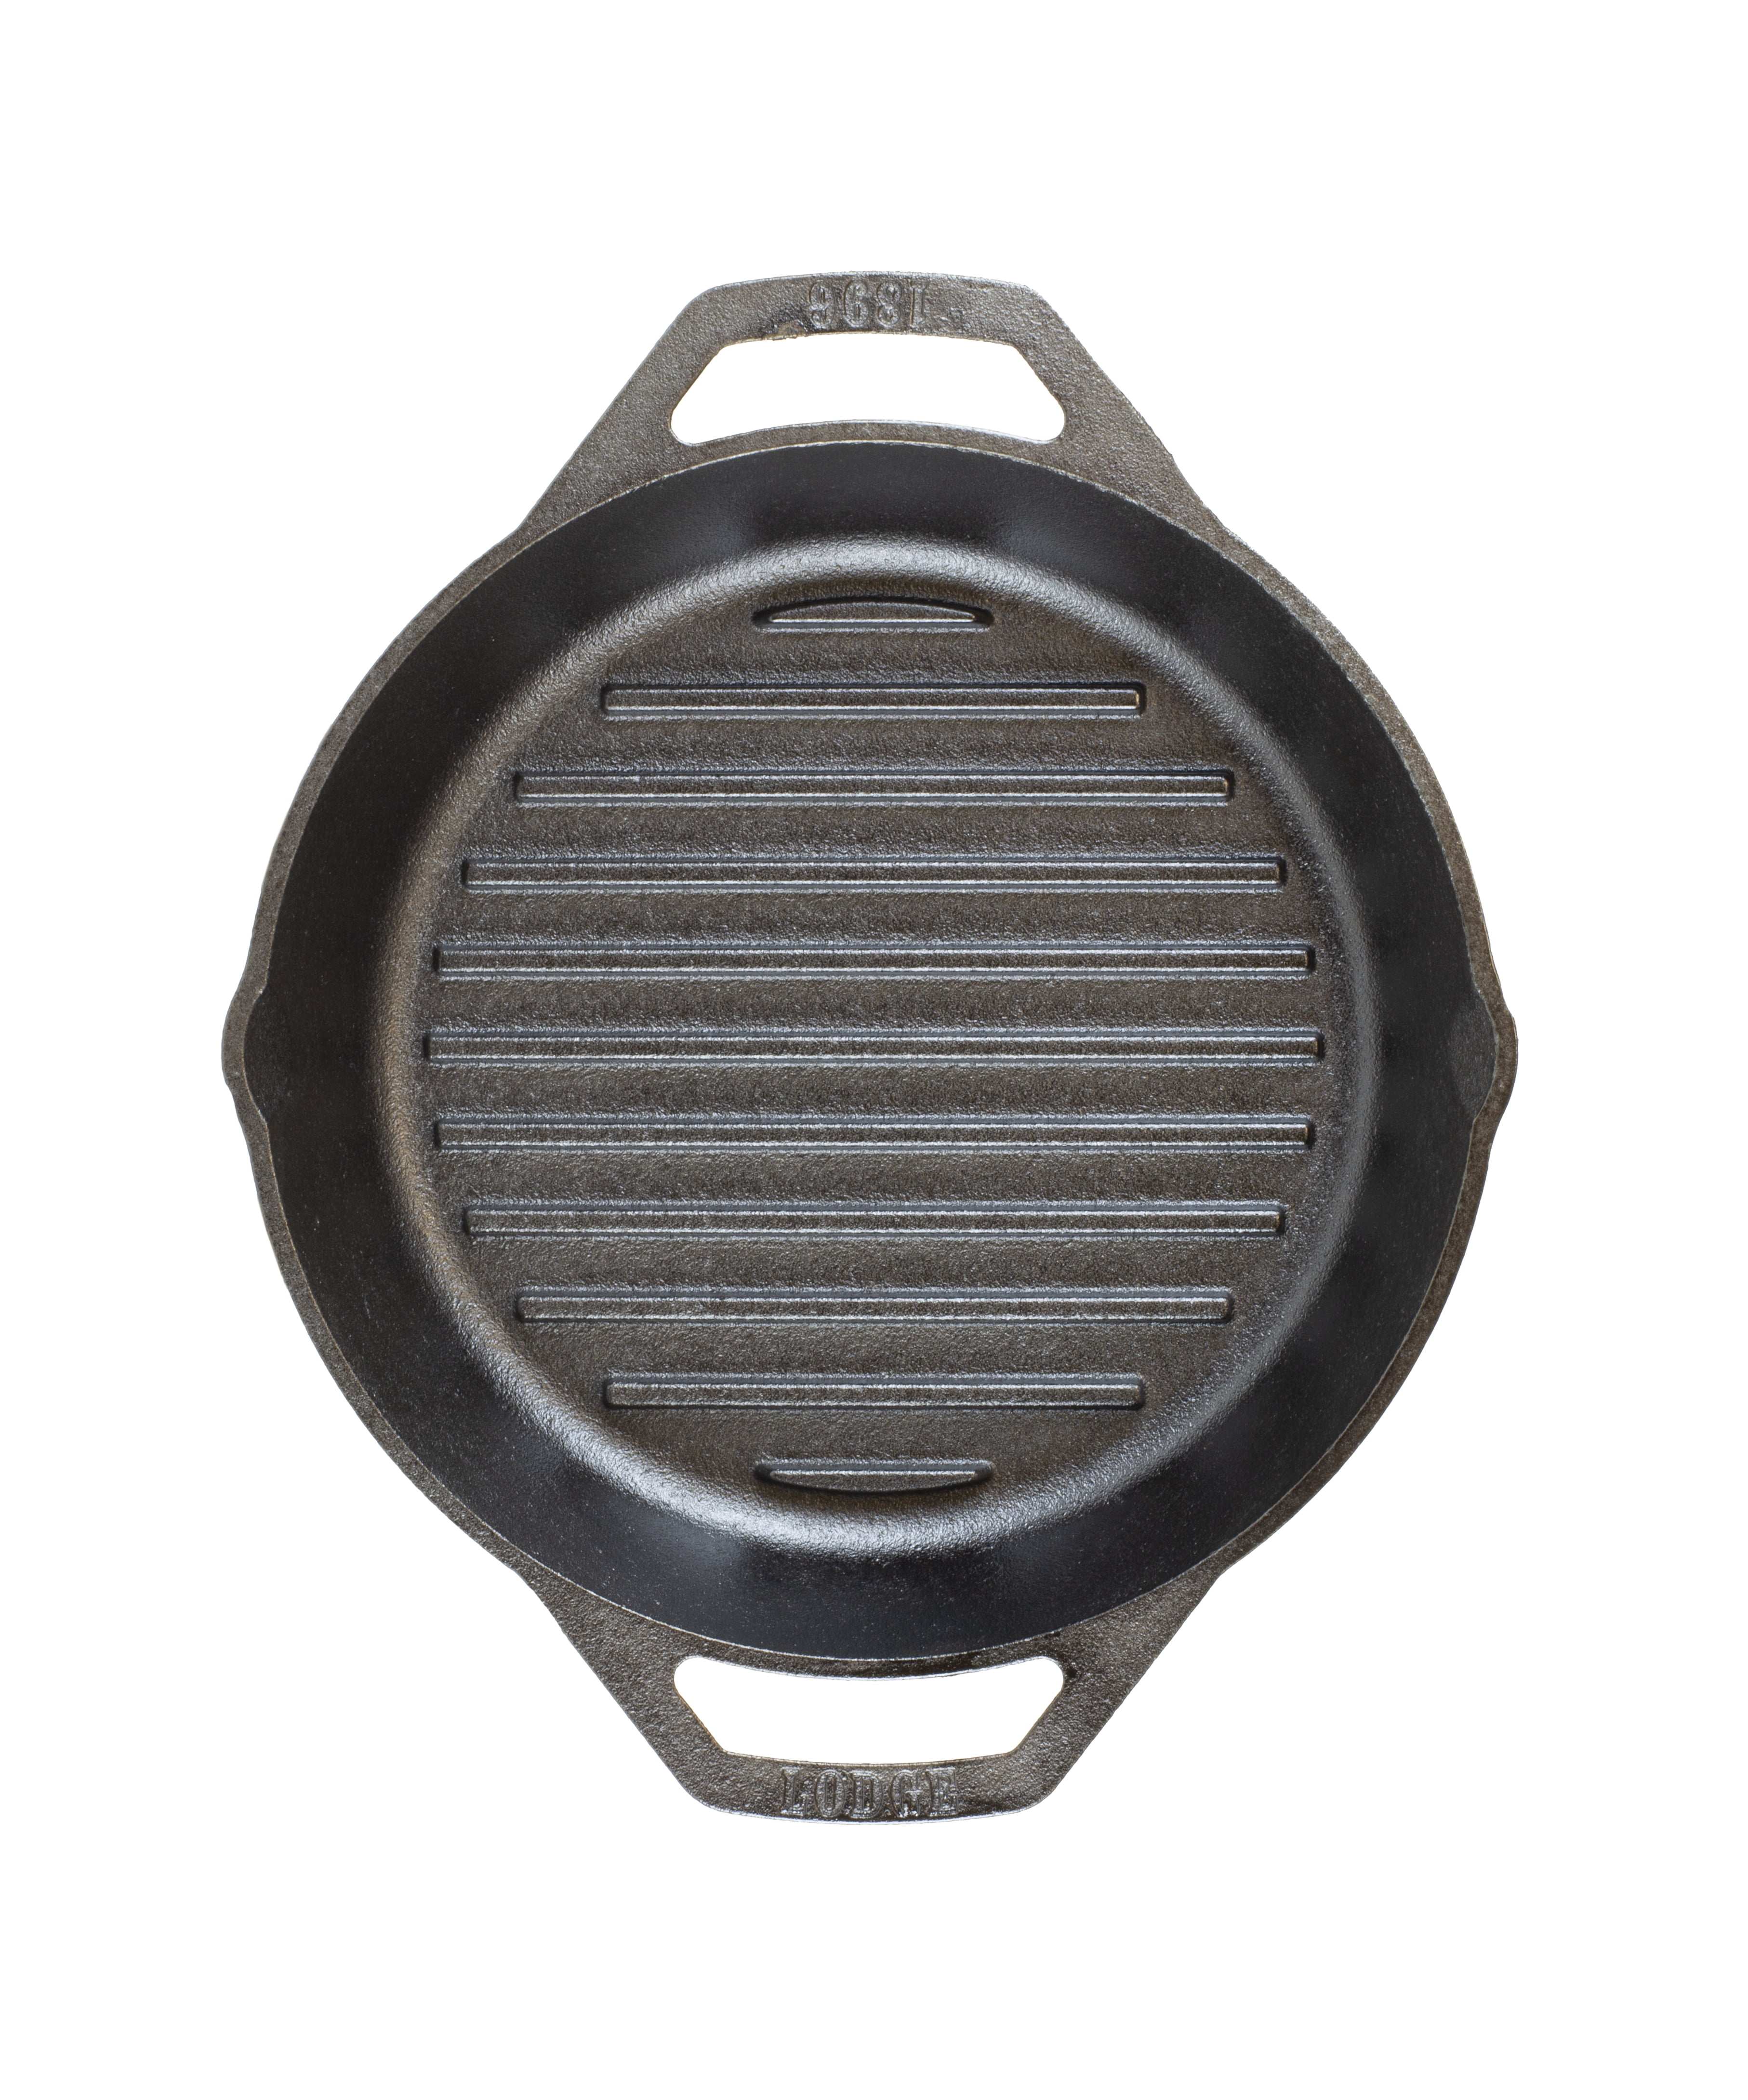 Lodge Cast Iron 17 Inch Cast Iron Dual Handle Pan - Induction Compatible -  Oven Safe - Black